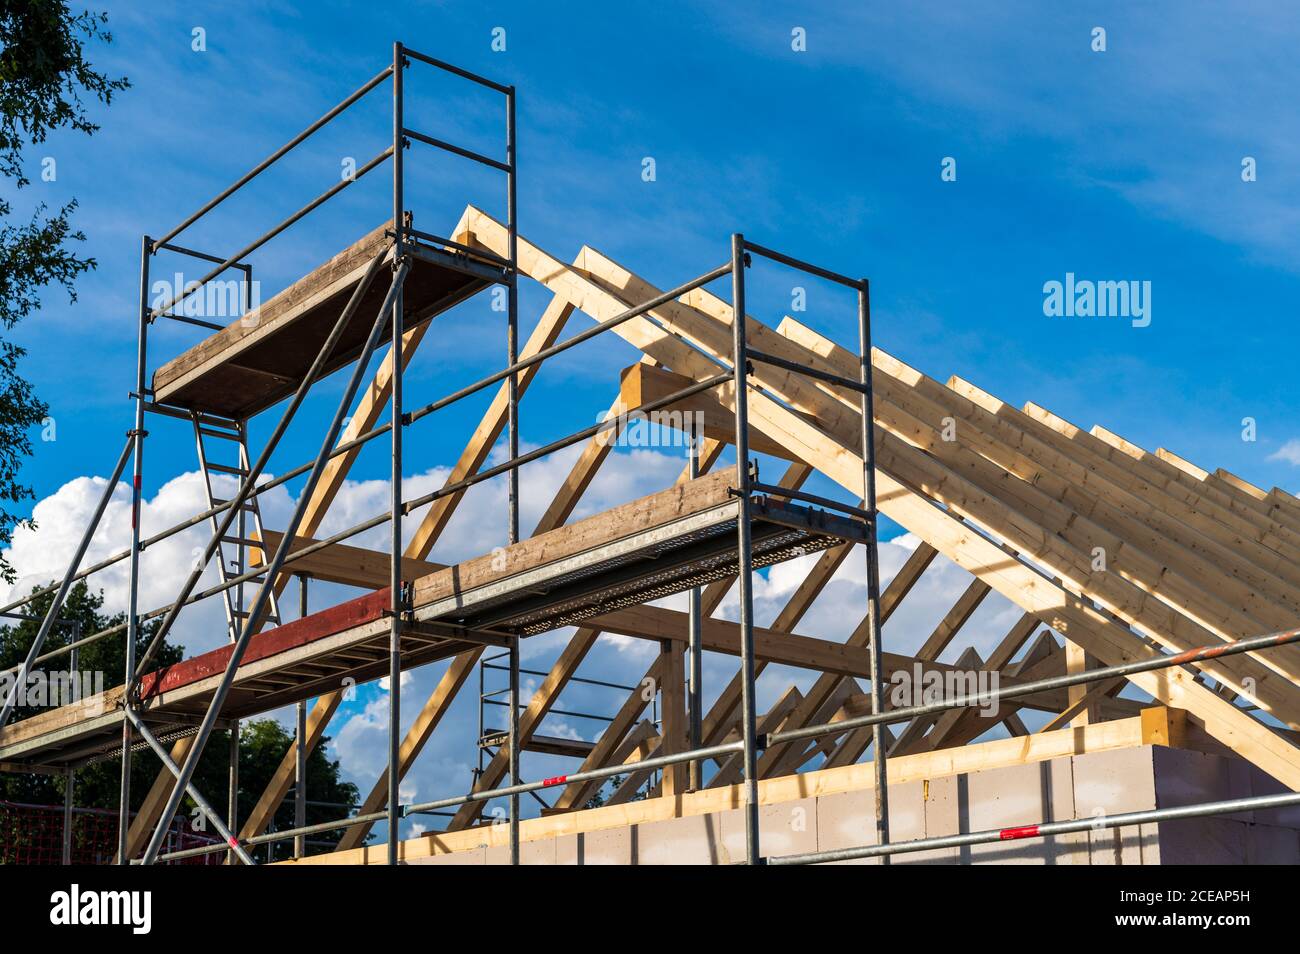 Roof truss of a home with scaffolding Stock Photo